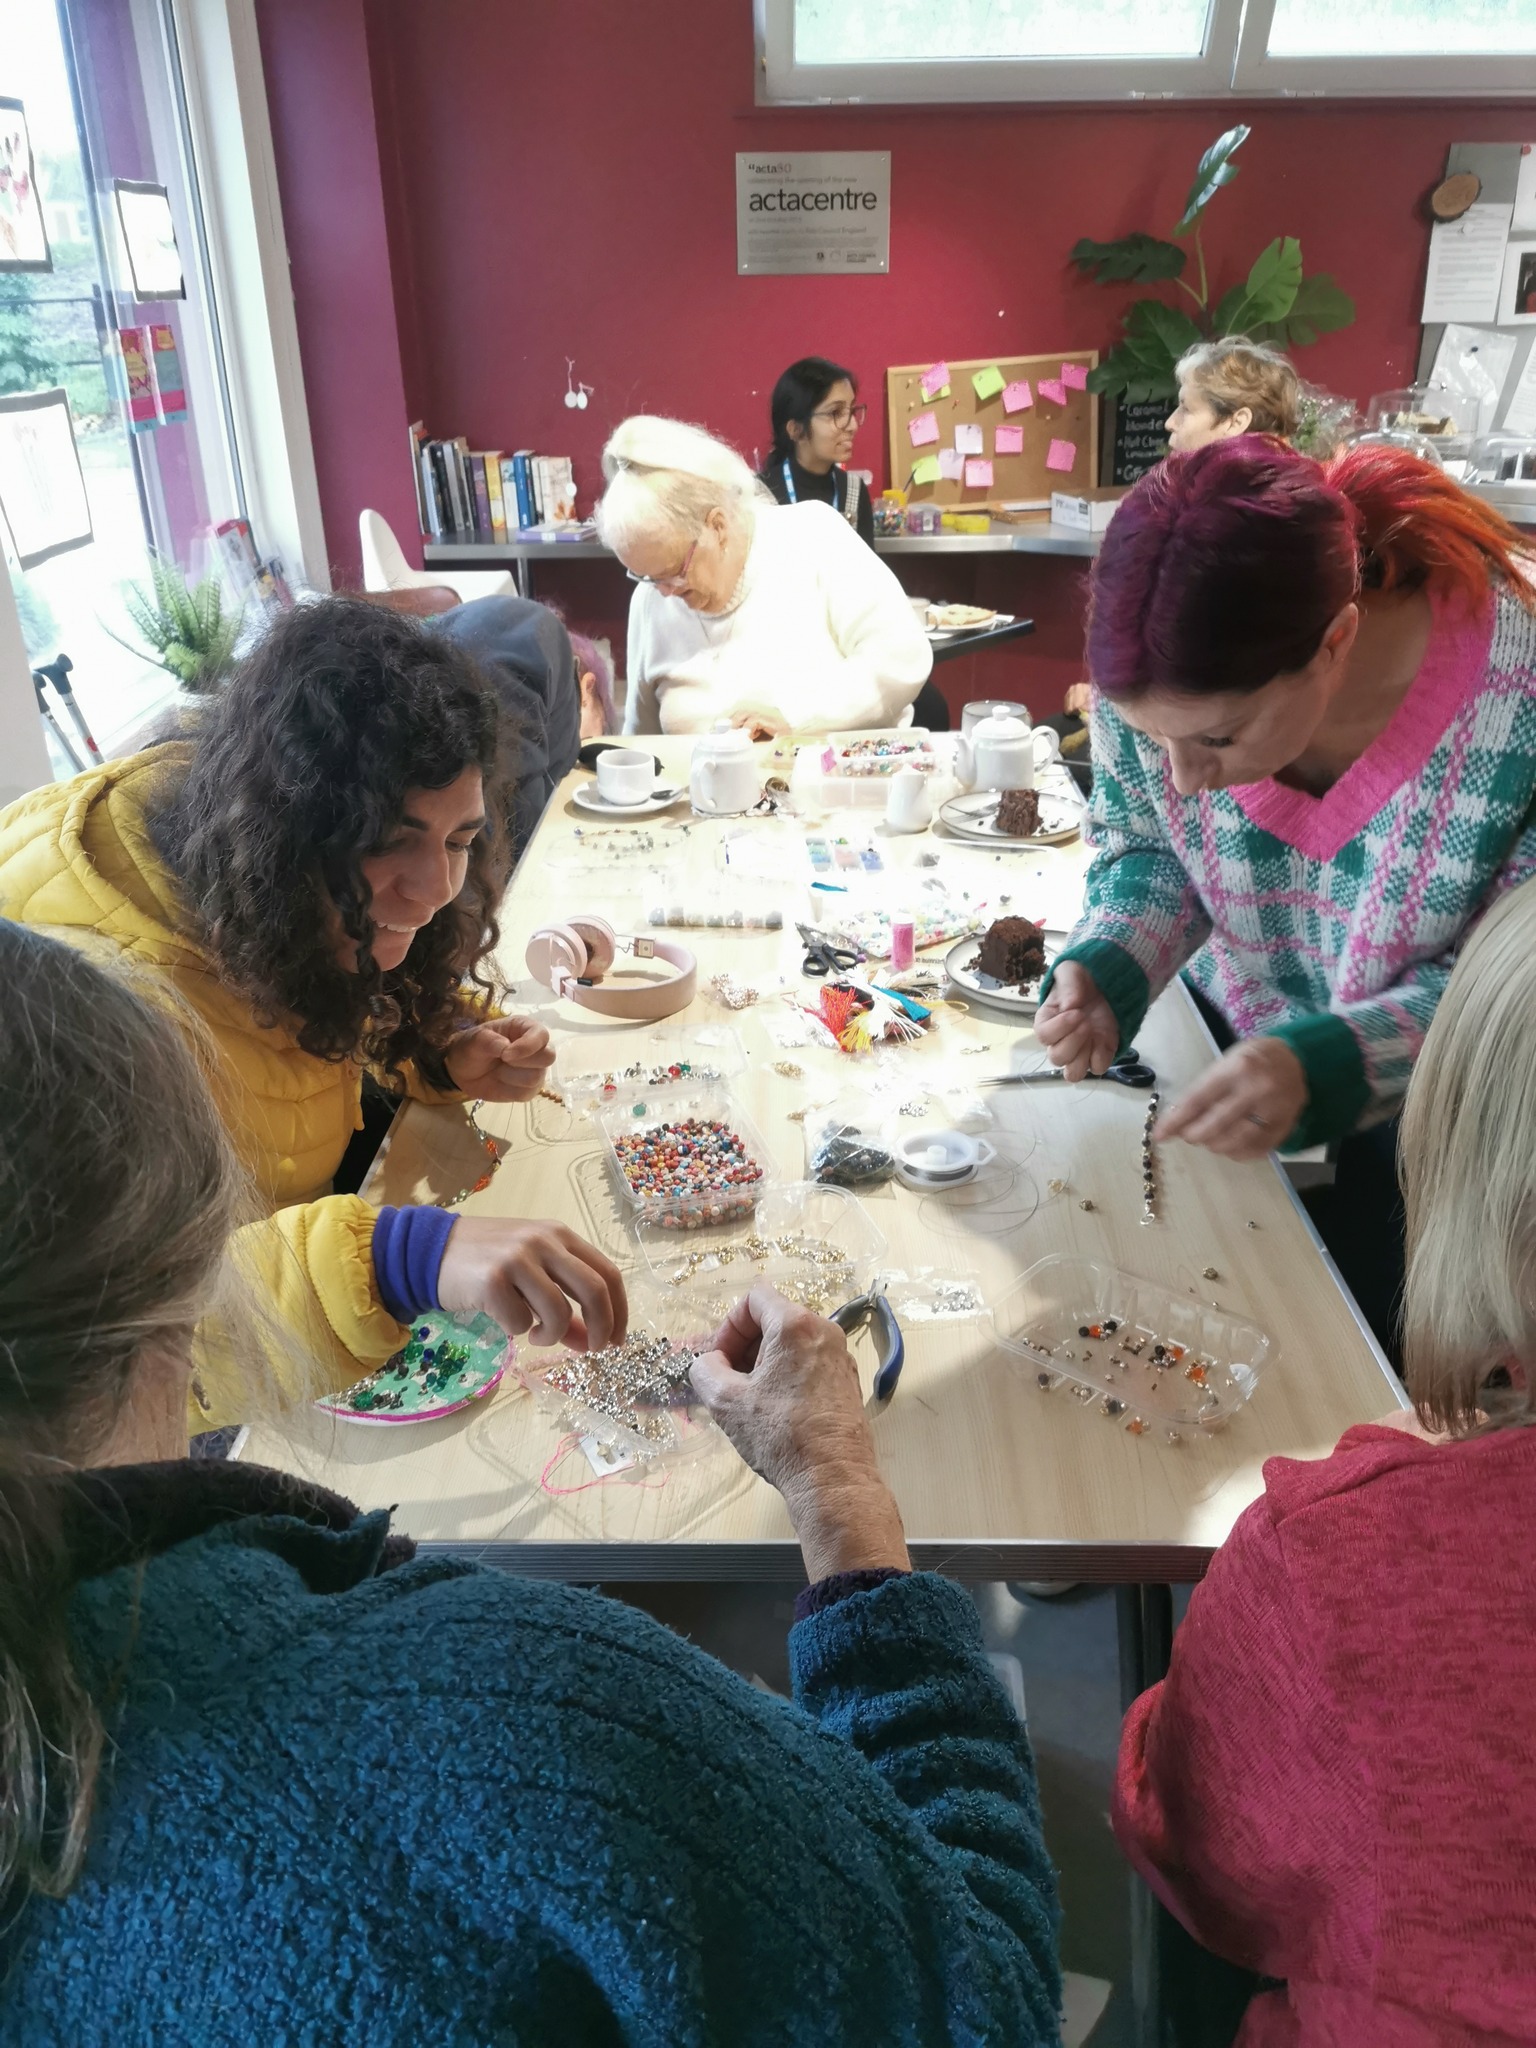 A jewellery making workshop at the Creative Wellbeing Cafe